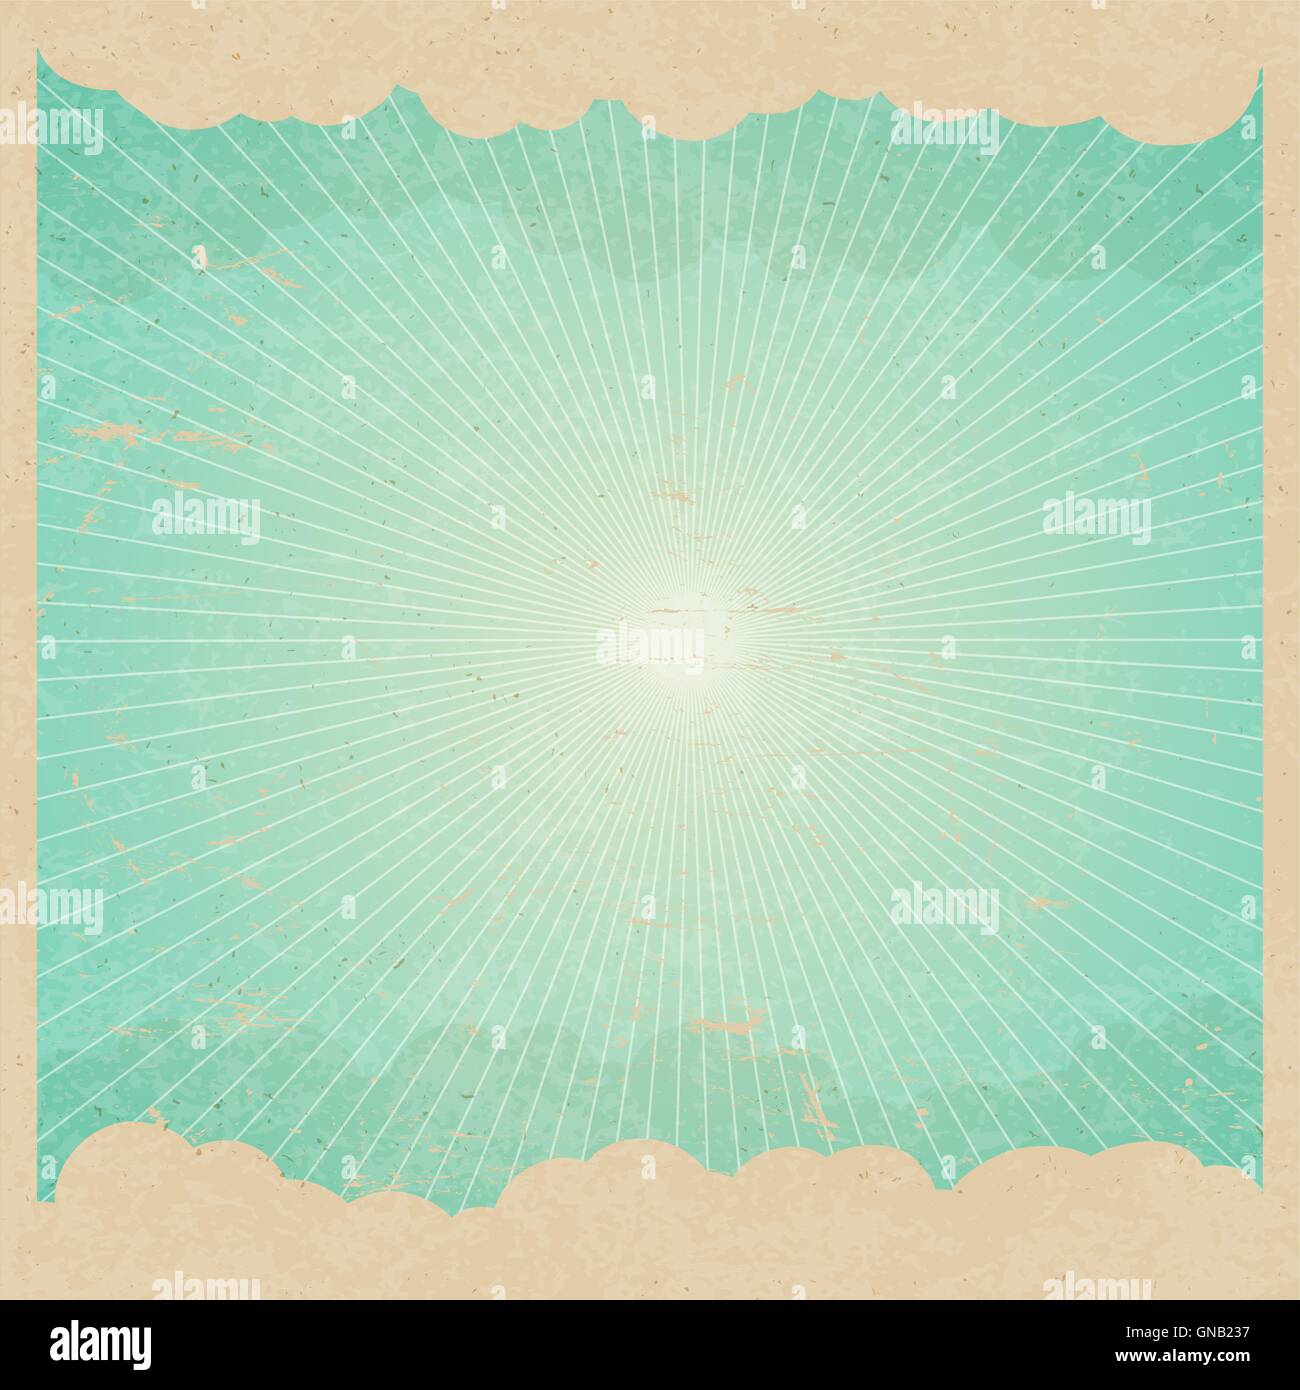 Vintage Background with Clouds and Rays. Rays, leaves, clouds, s Stock Vector